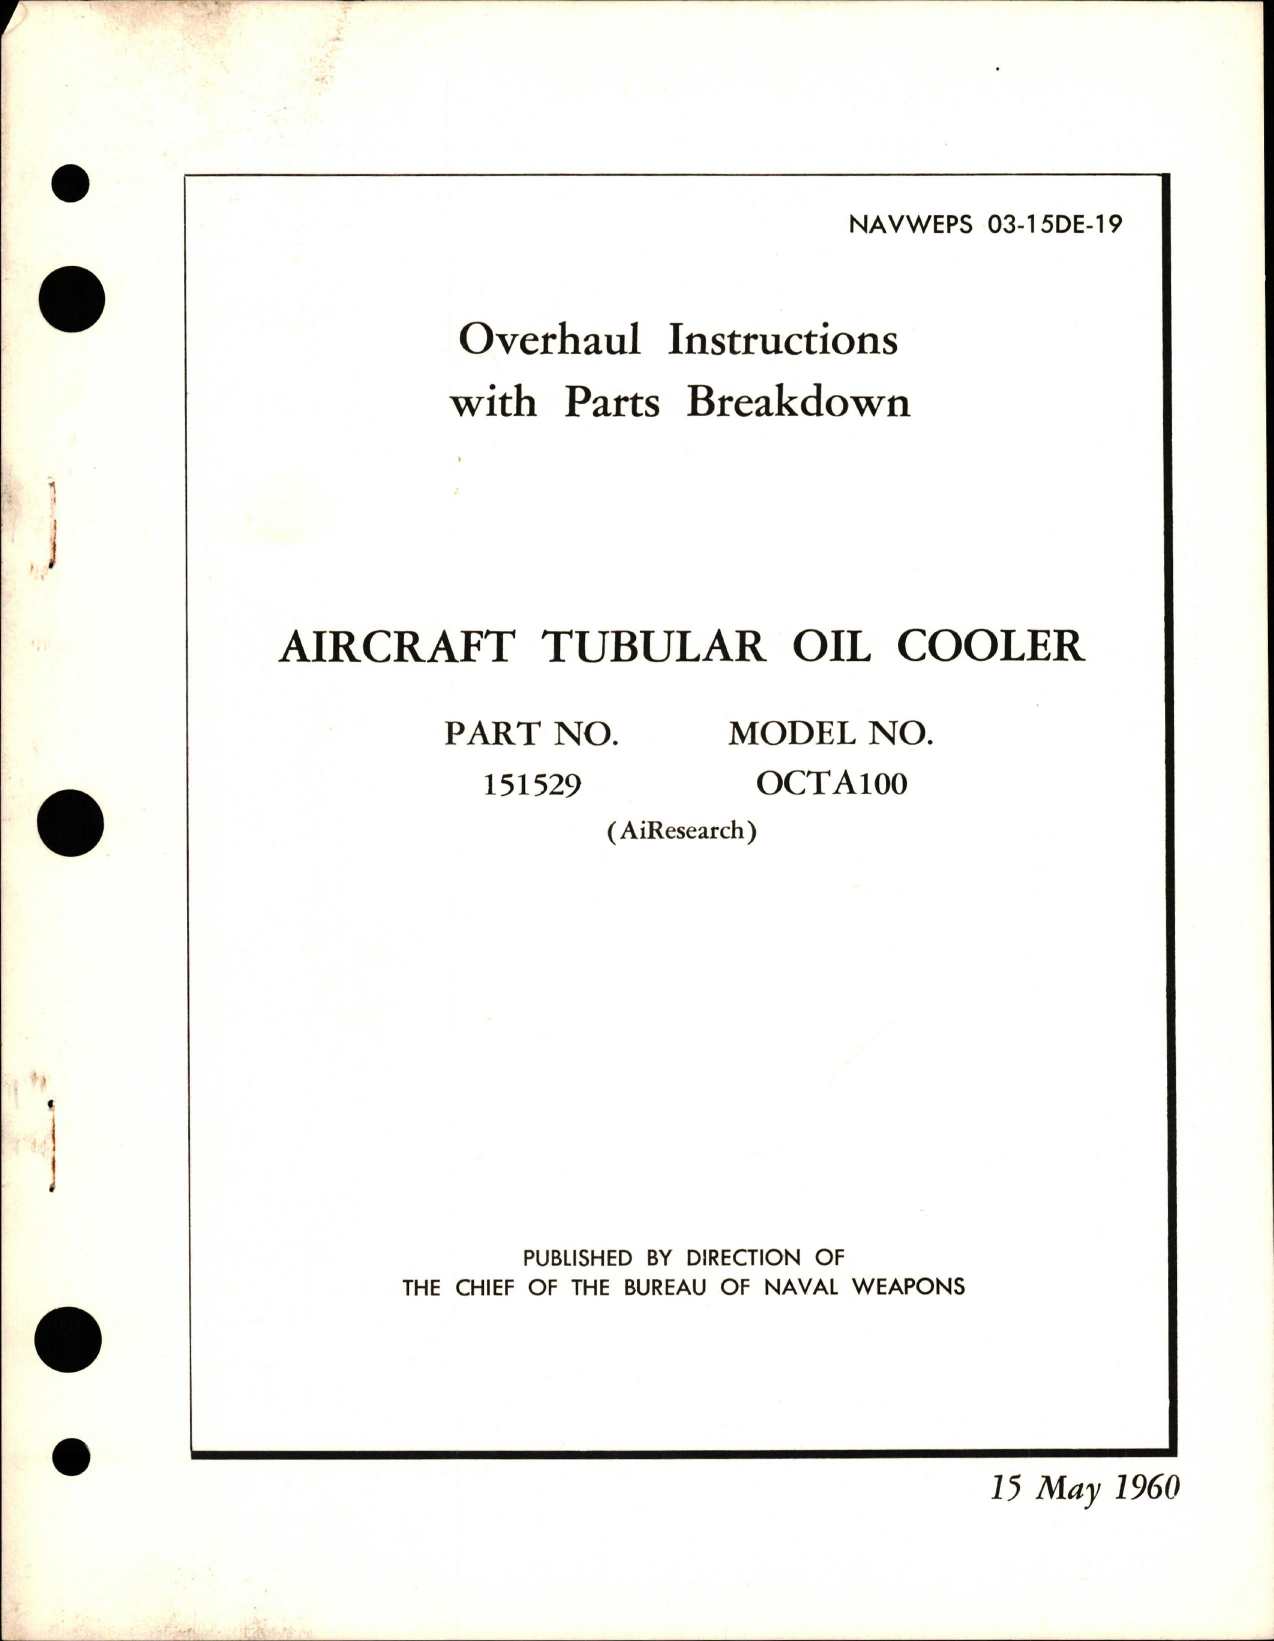 Sample page 1 from AirCorps Library document: Overhaul Instructions with Parts Breakdown for Aircraft Tubular Oil Cooler - Part 151529 - Model OCTA100